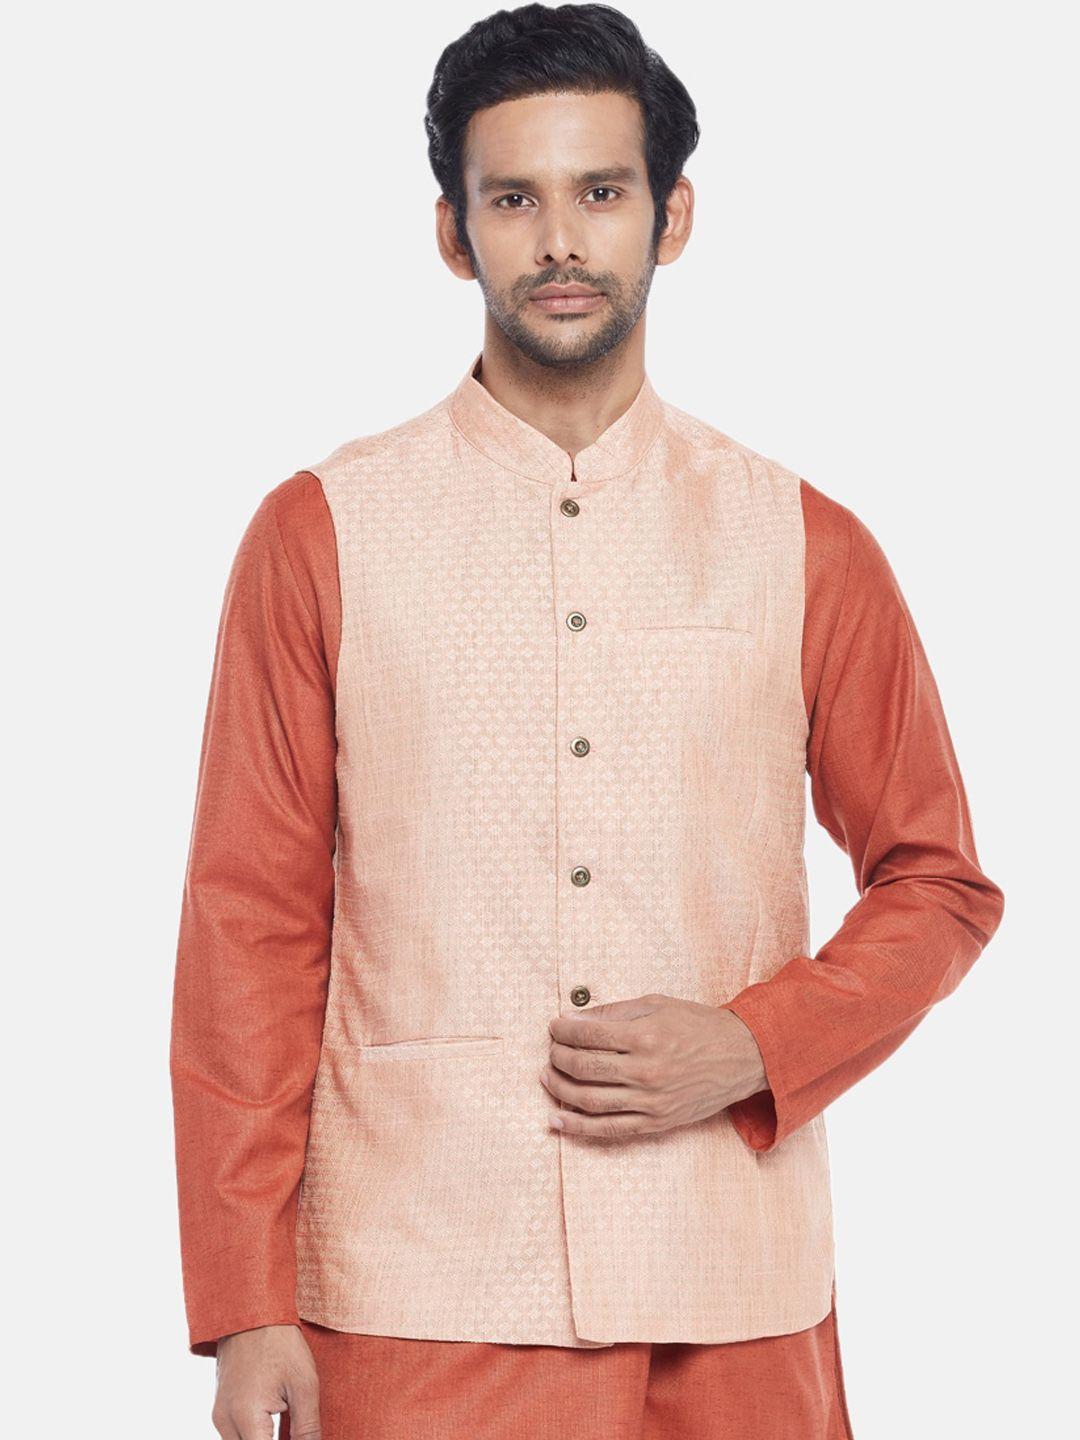 indus route by pantaloons men pink woven design waistcoat